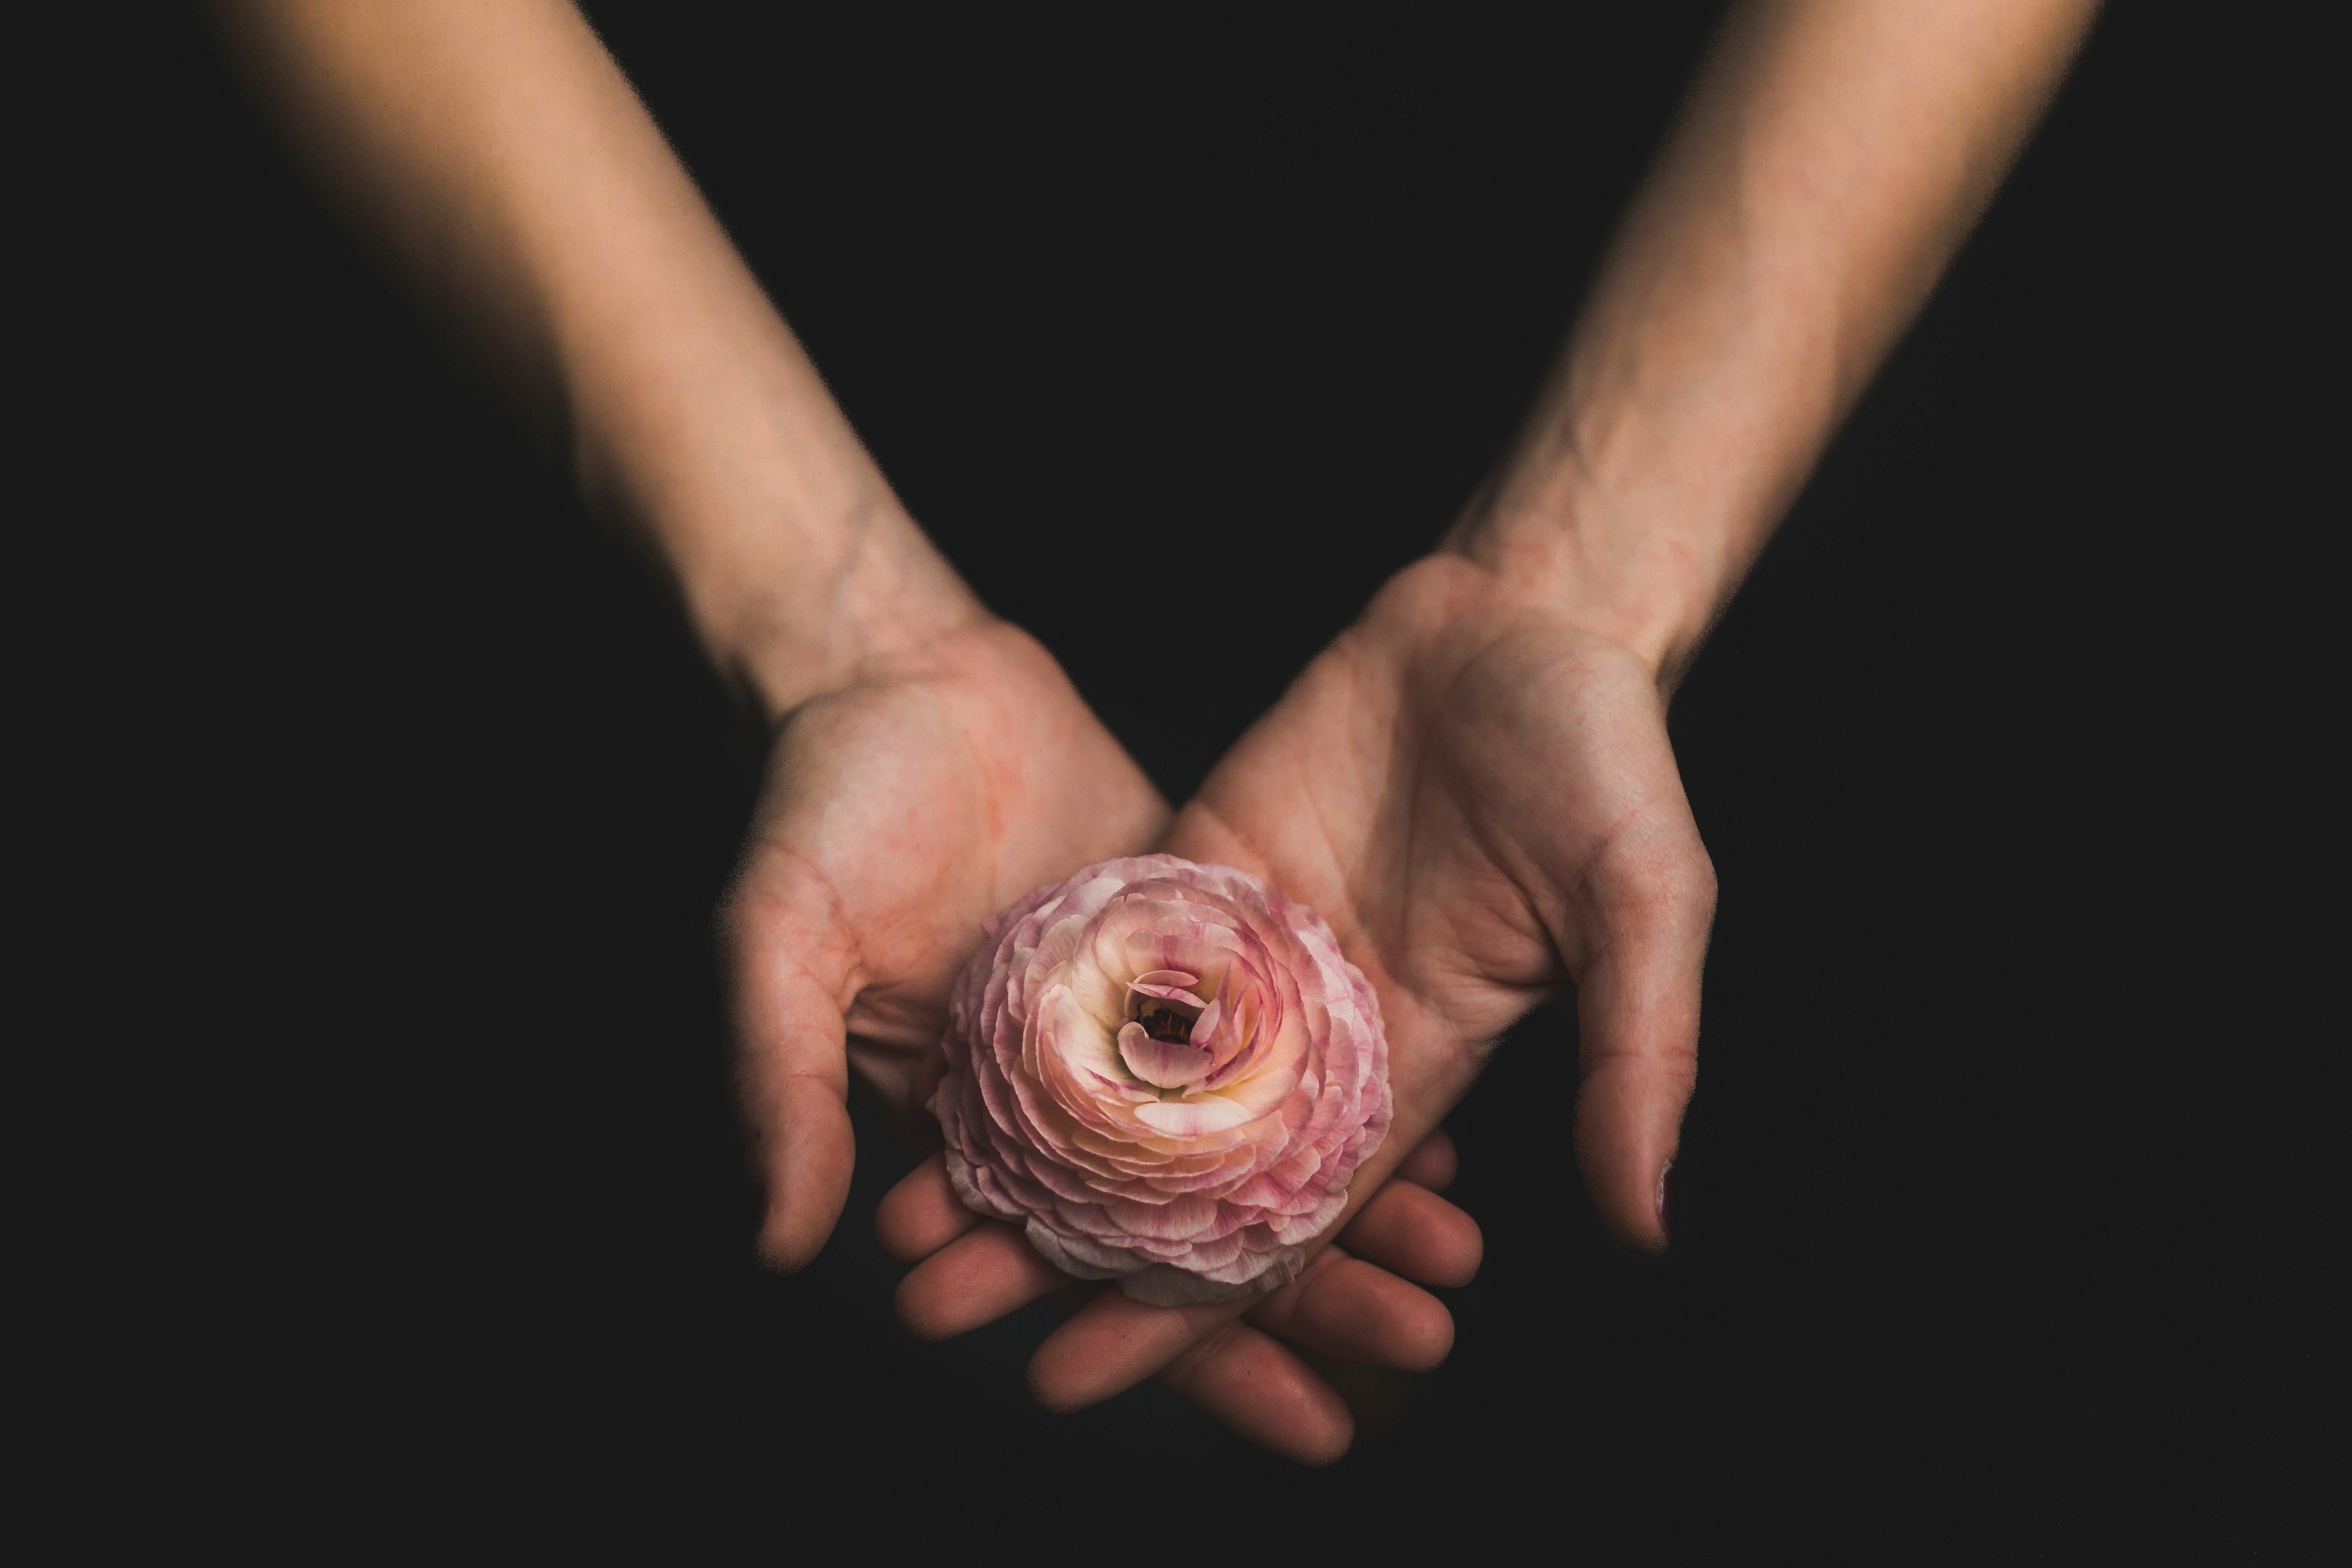 Holding a pink peony